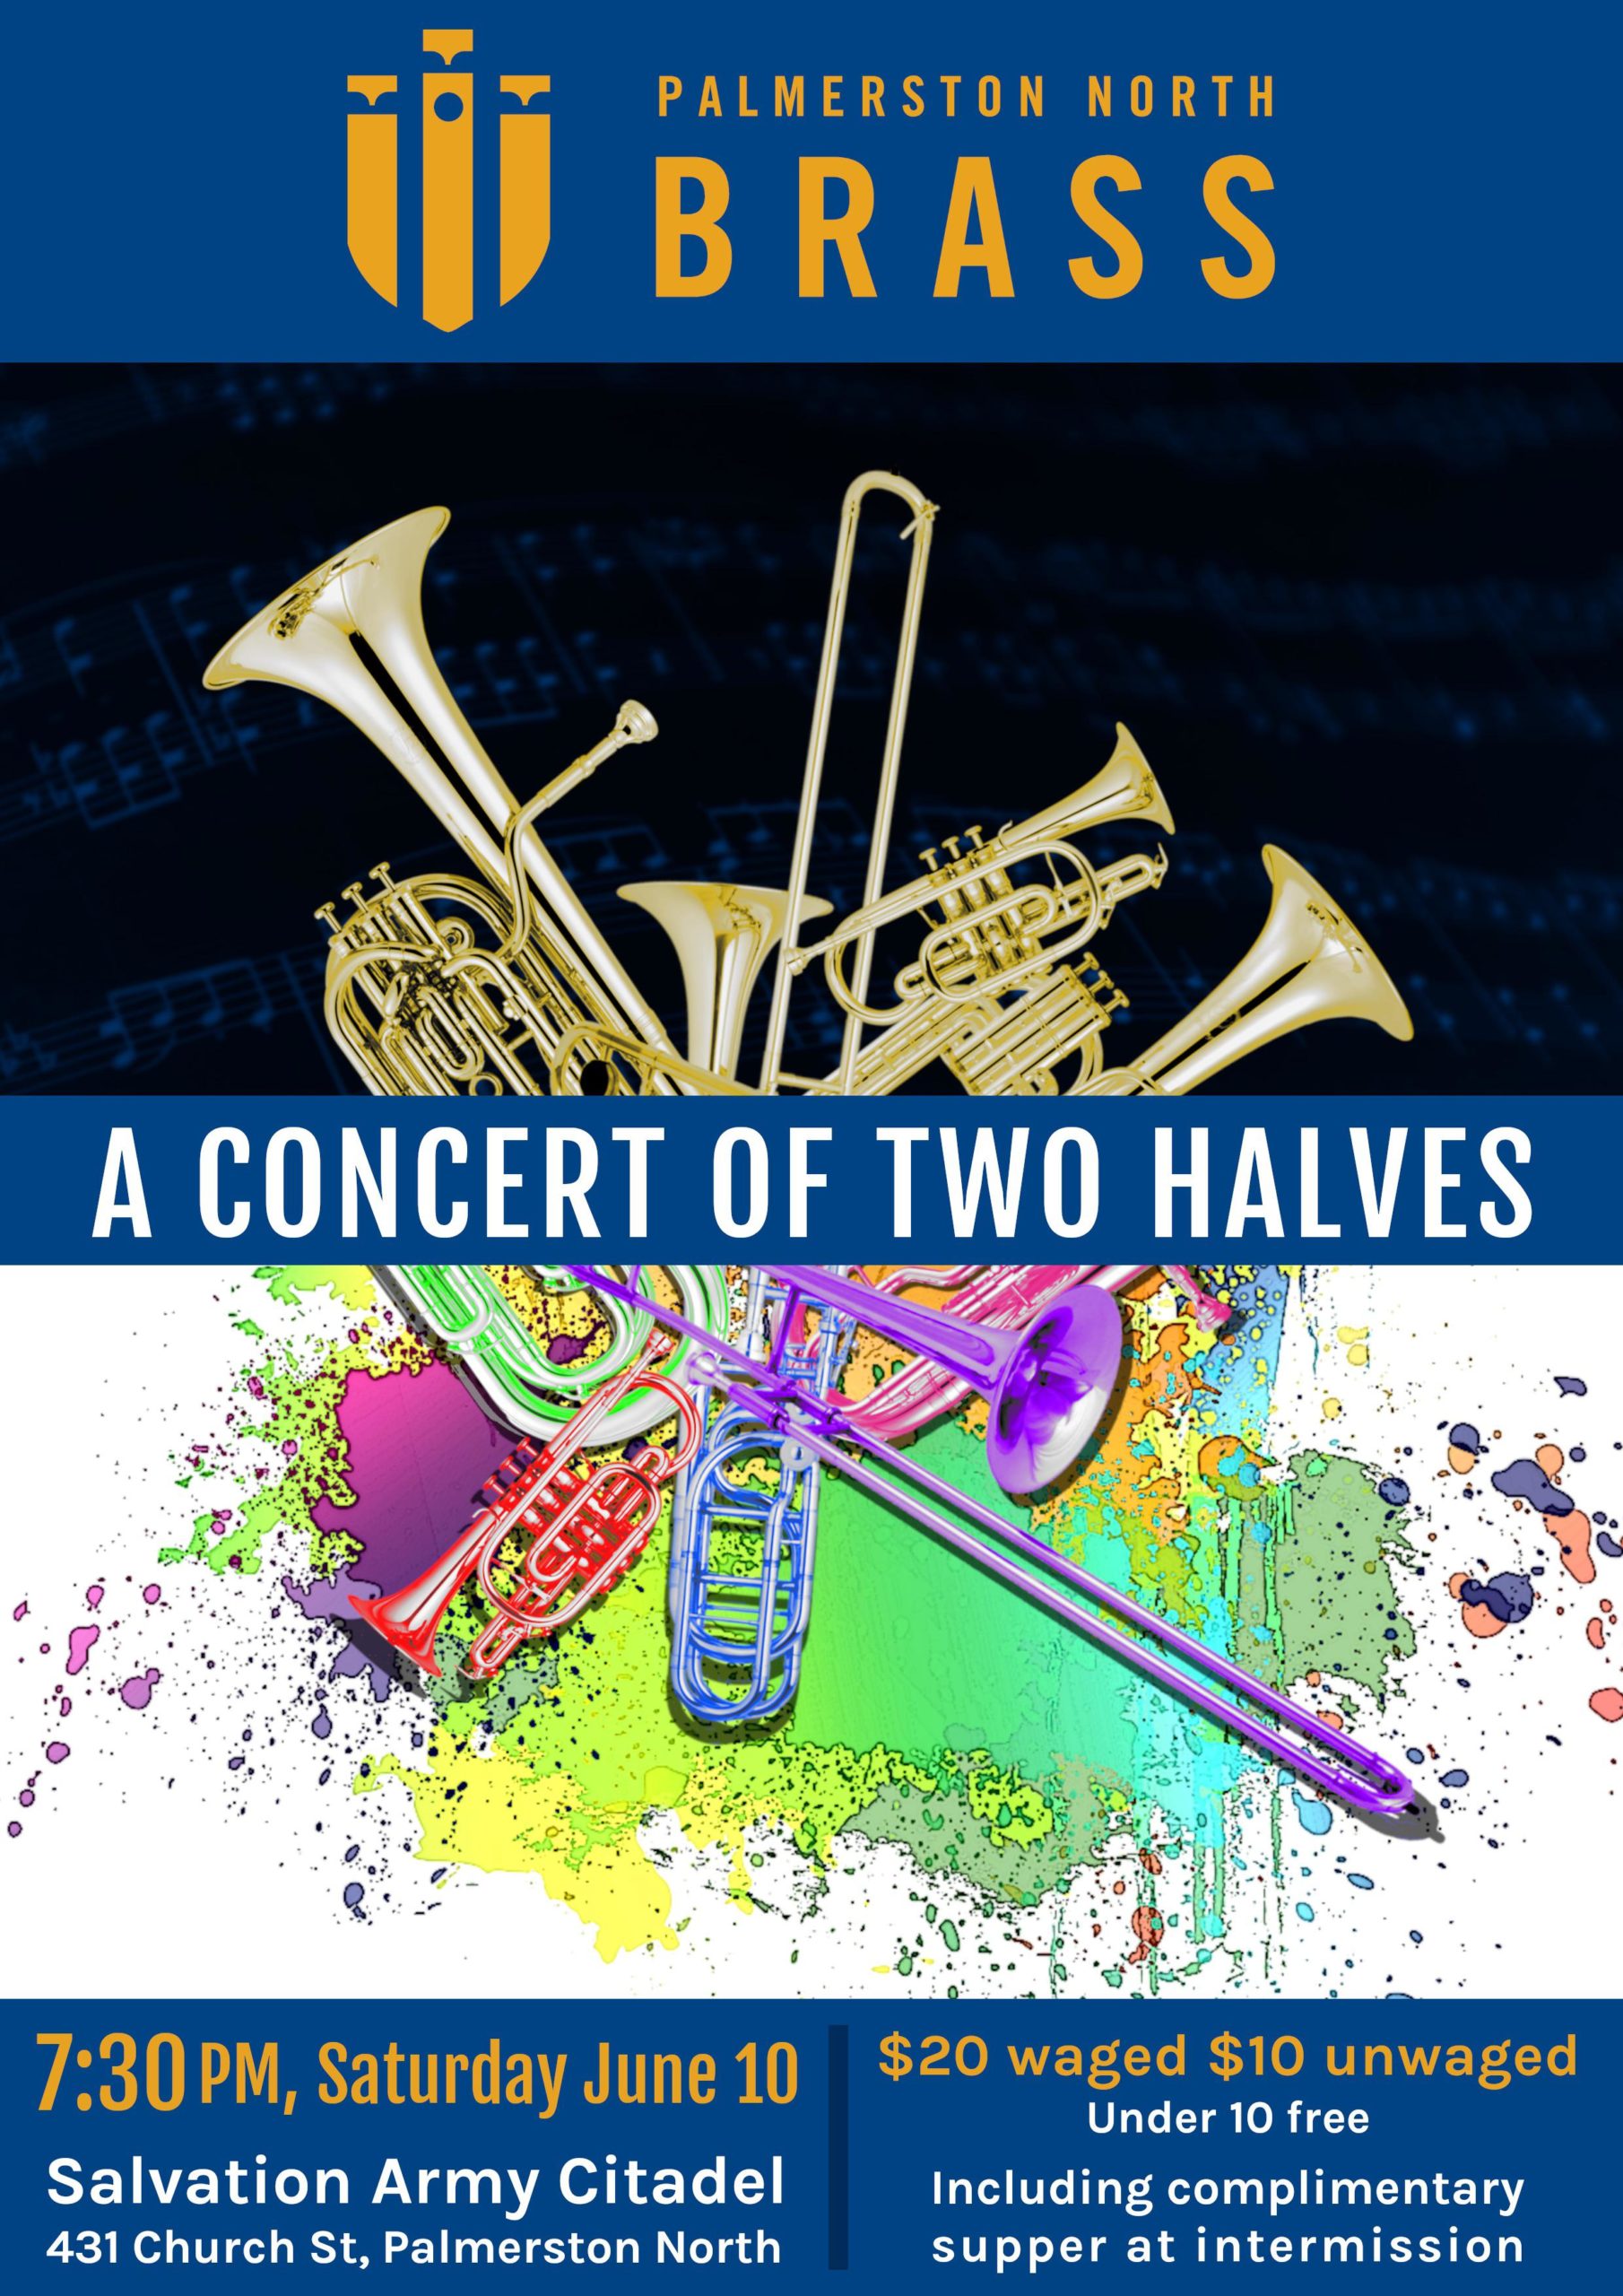 Concert poster for local brass band